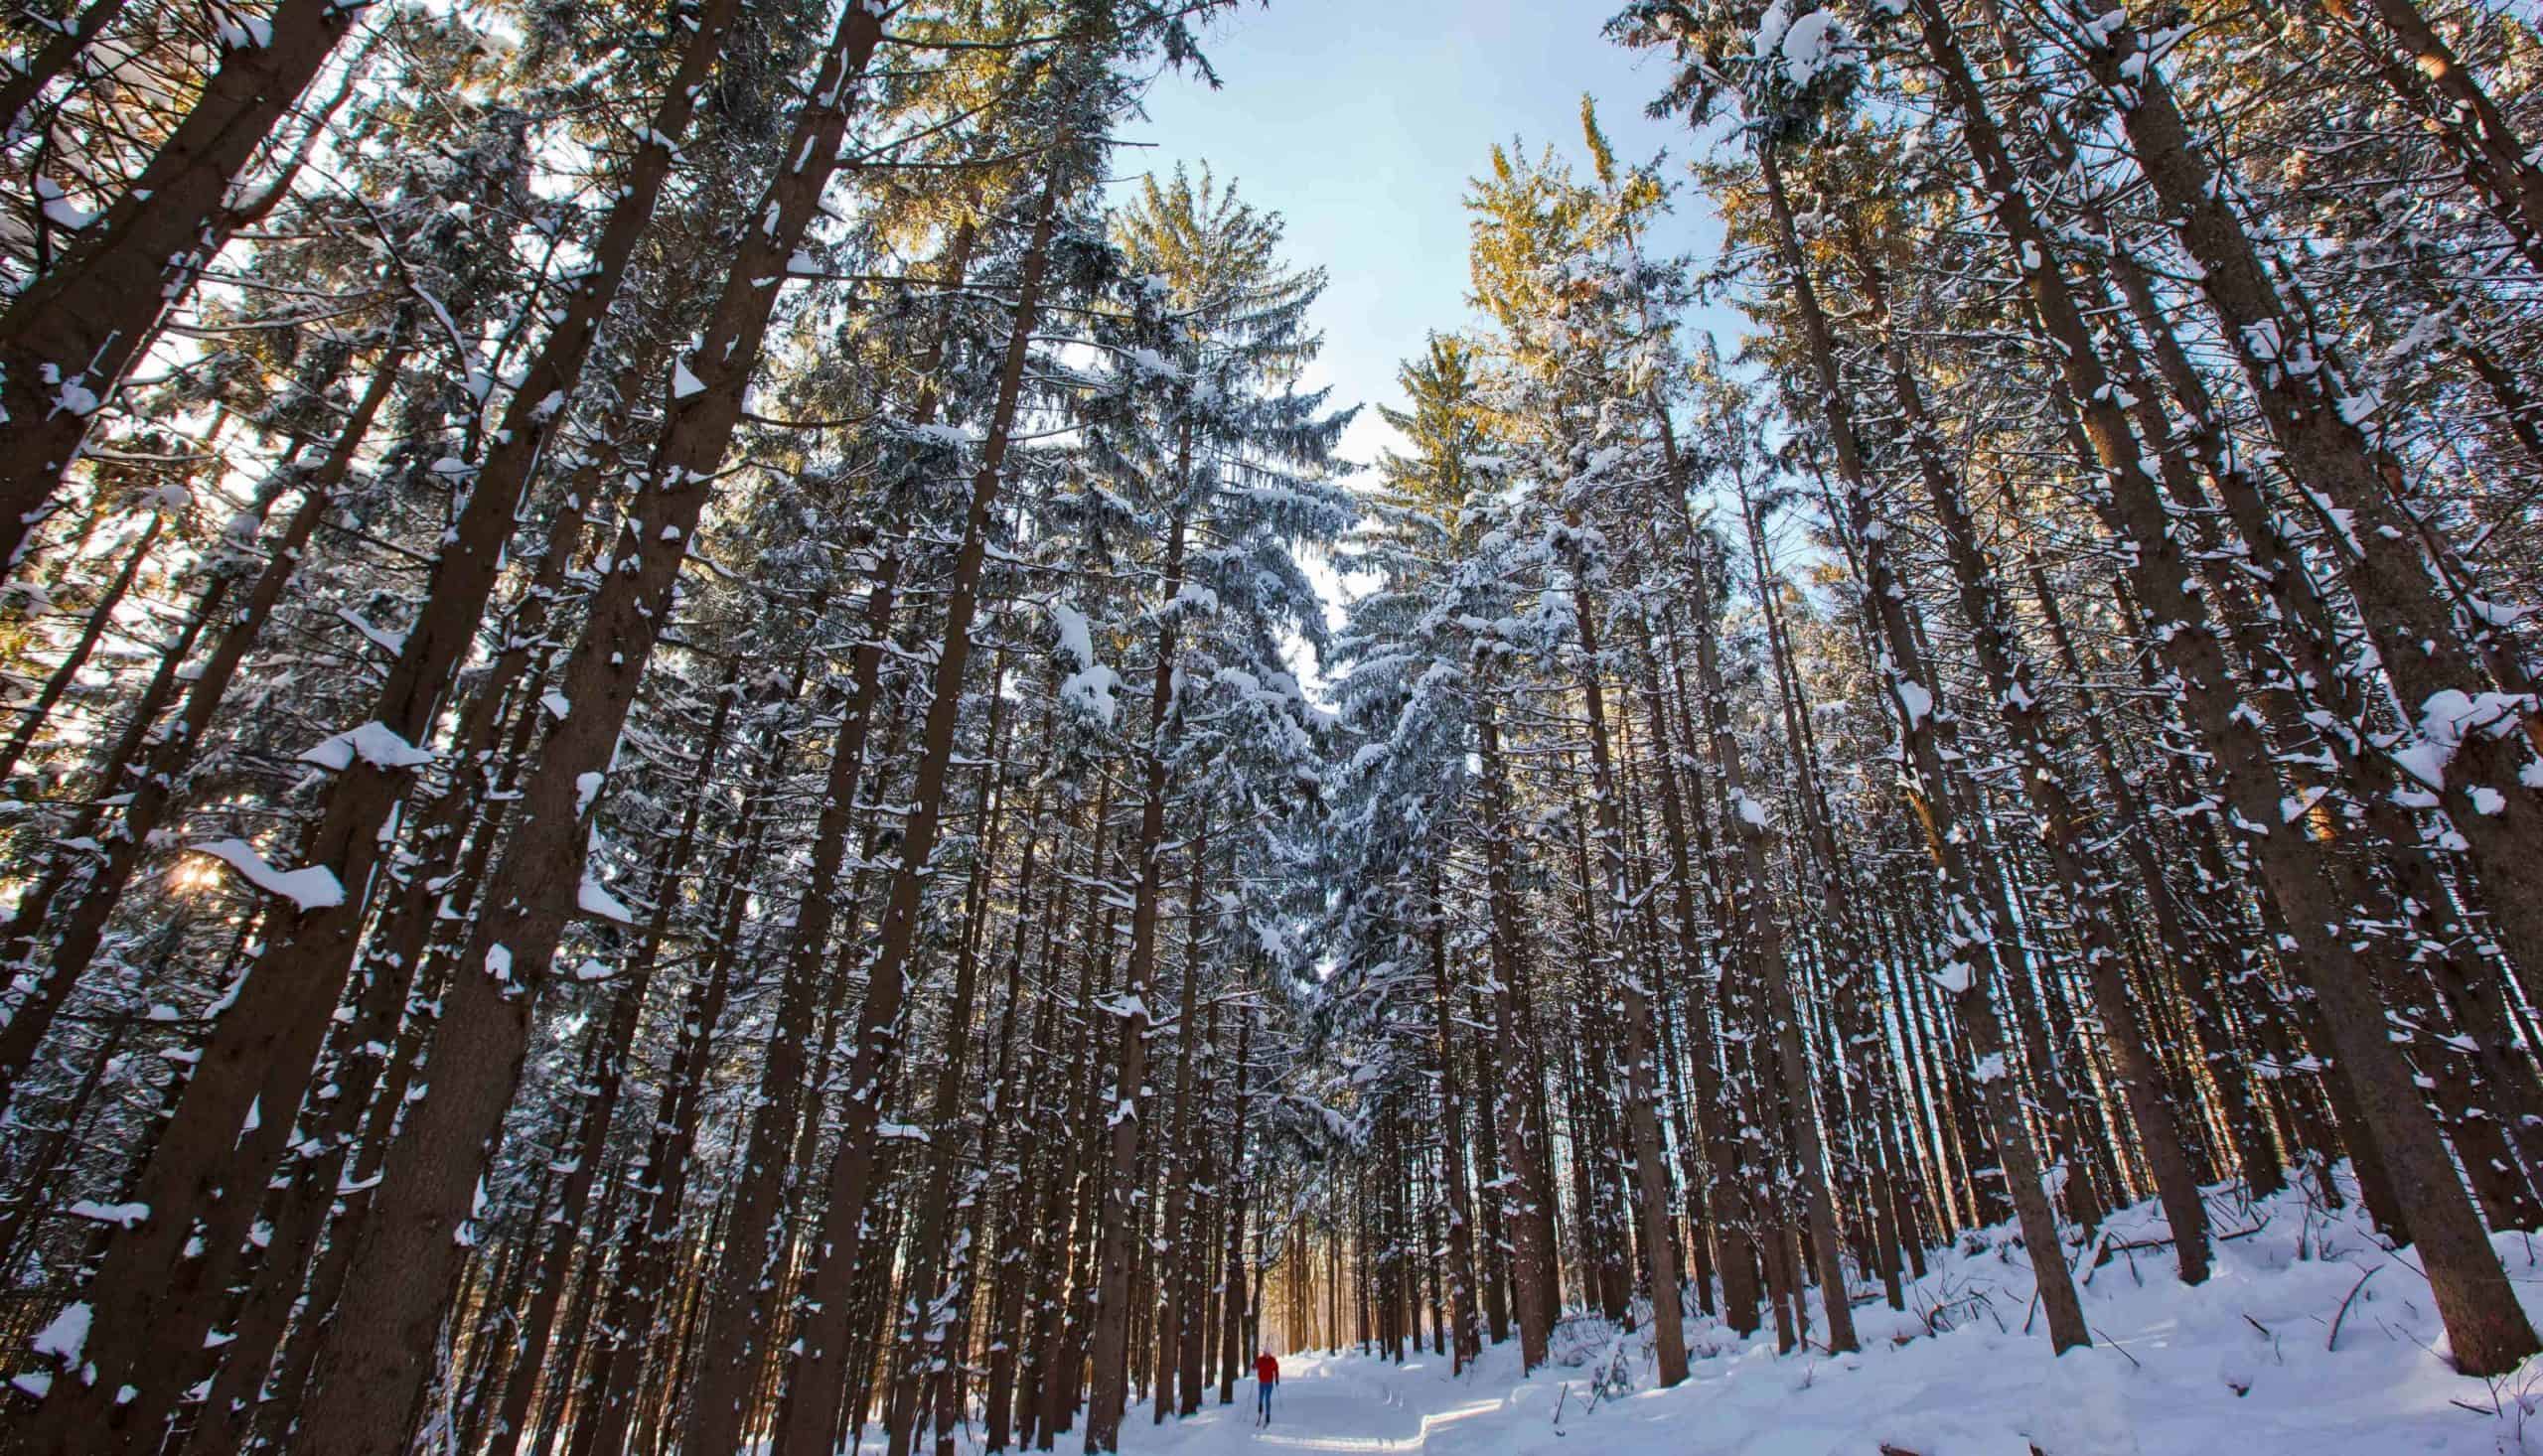 A cross country skier in a spruce forest at the Notchview Reservation in Windsor. Courtesy of The Trustees of Reservations.